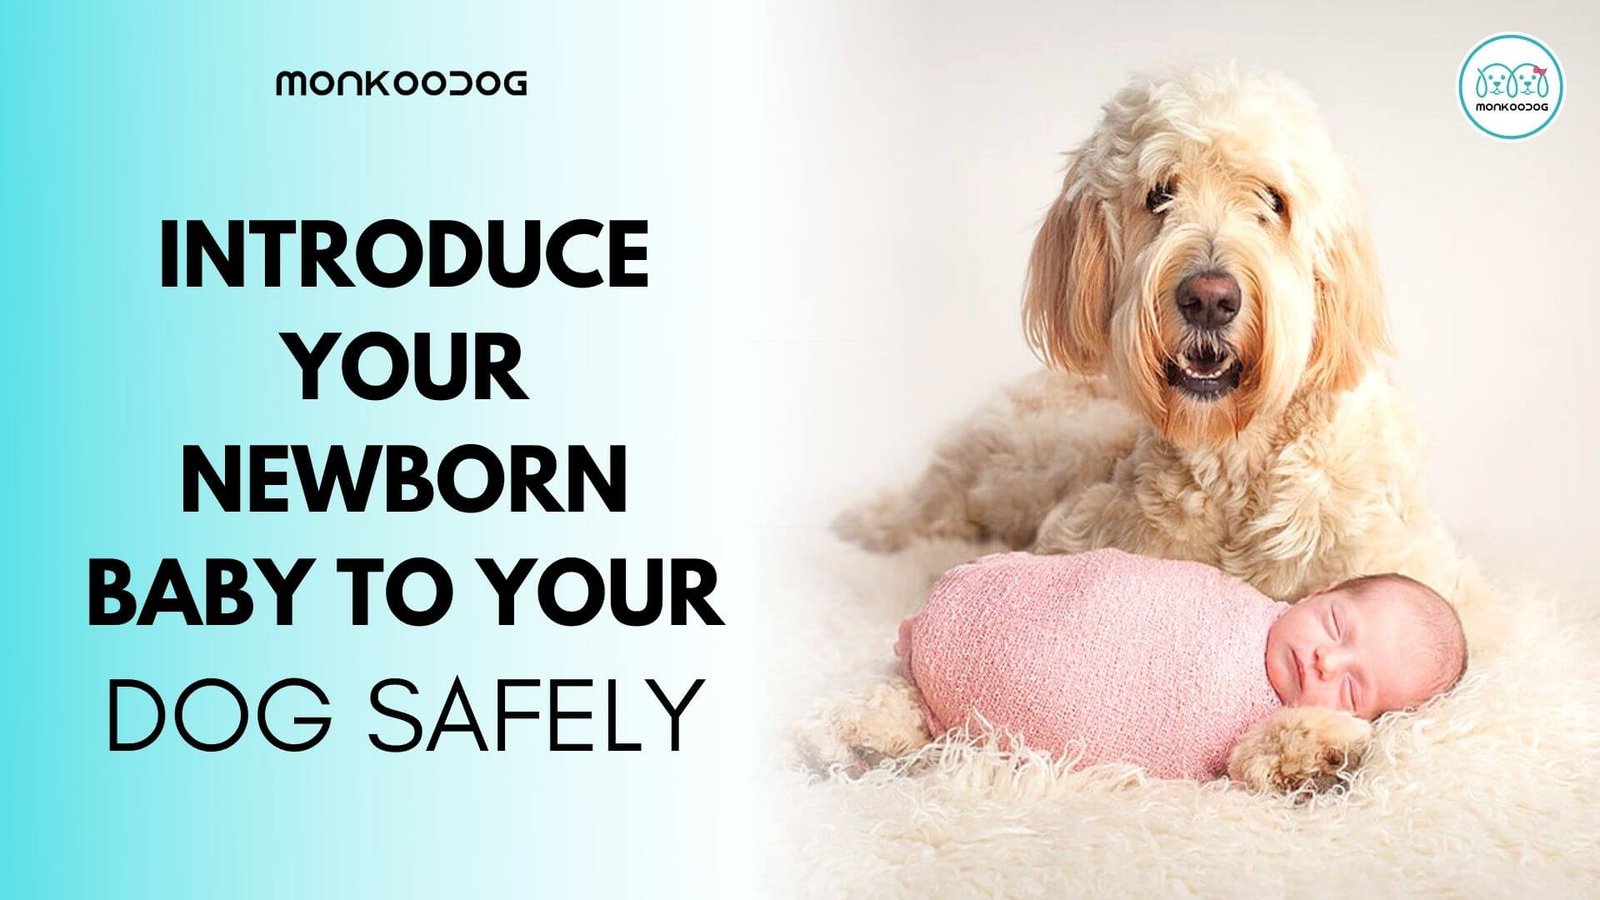 How To Safely Introduce Your Dog To Your Newborn Baby